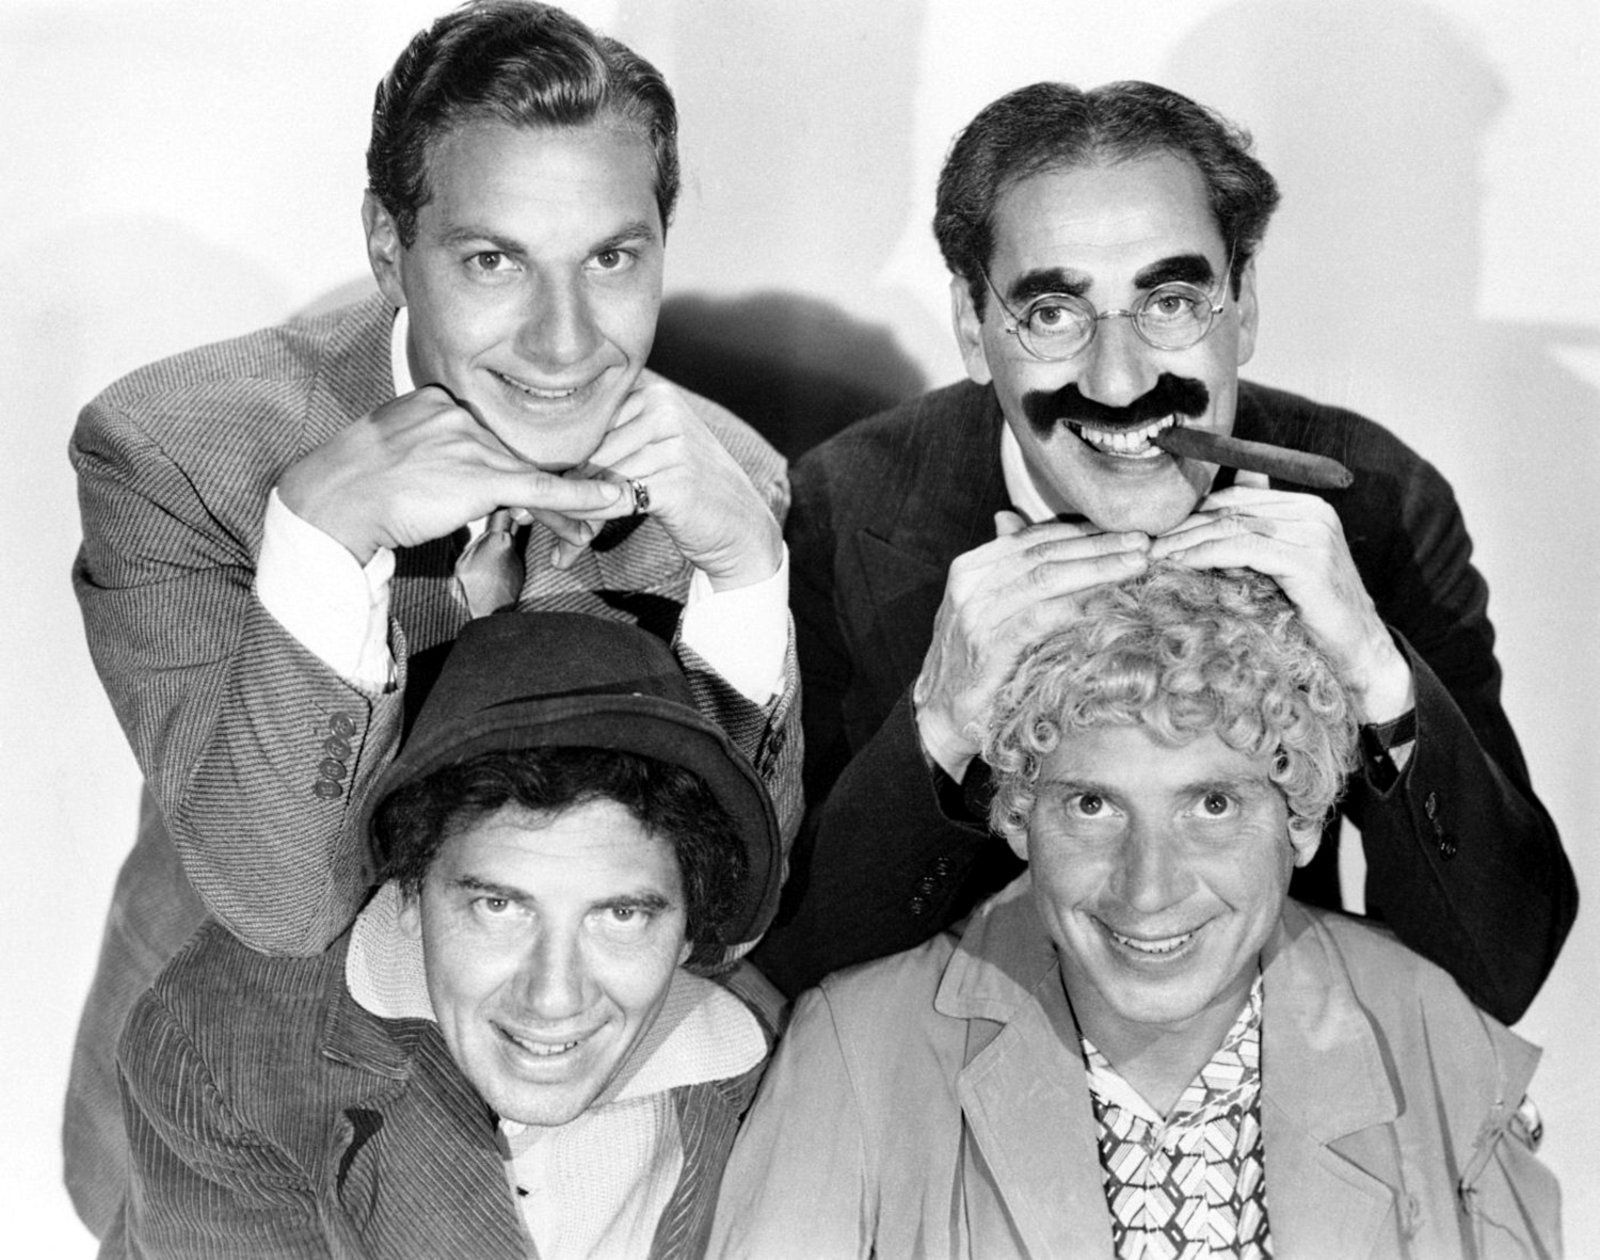 the markx brothers duck soup